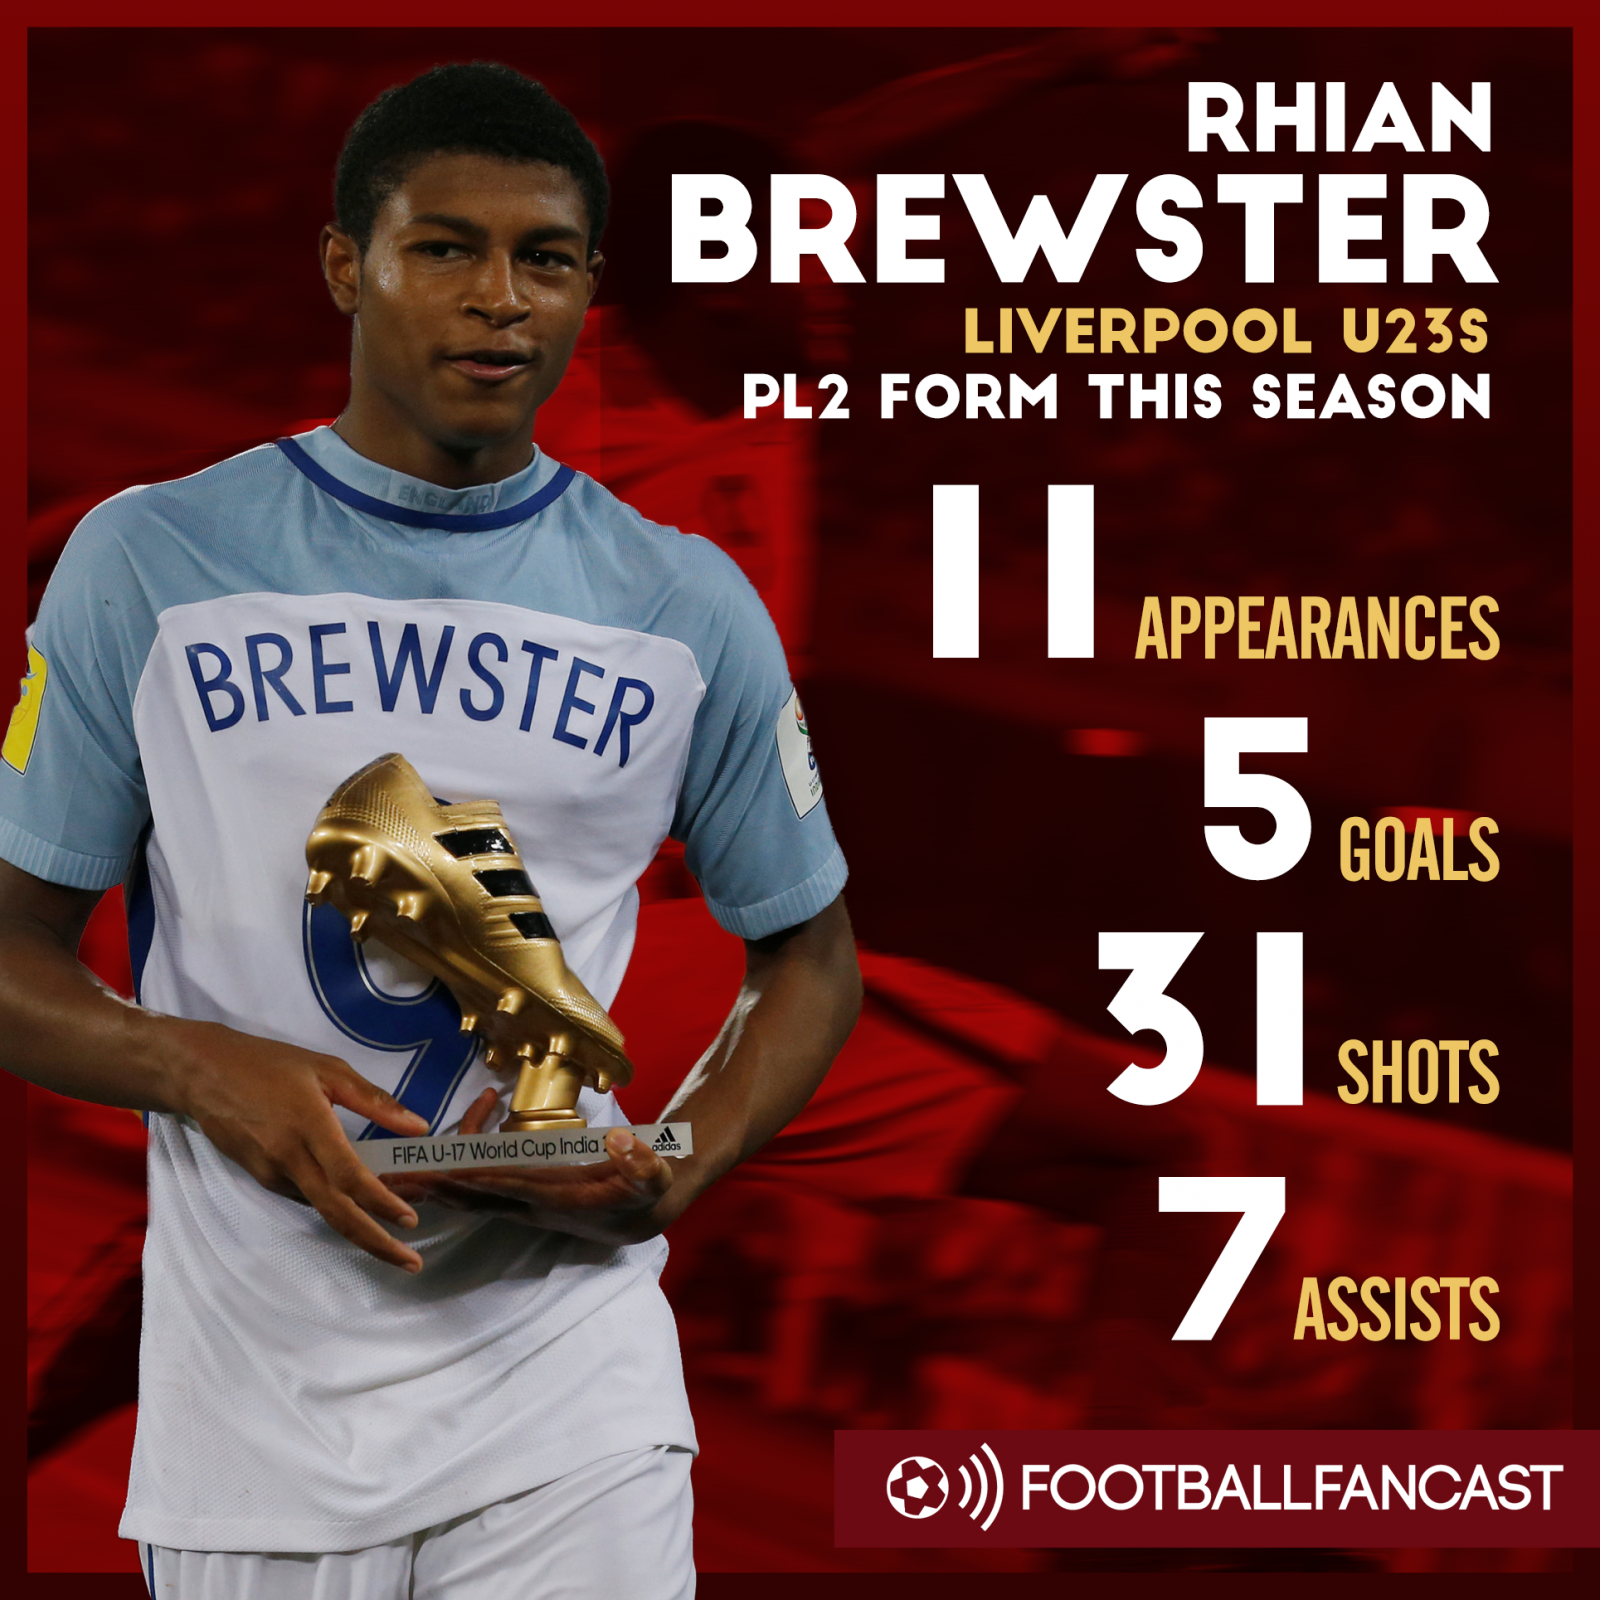 Rhian Brewster's PL2 stats for Liverpool